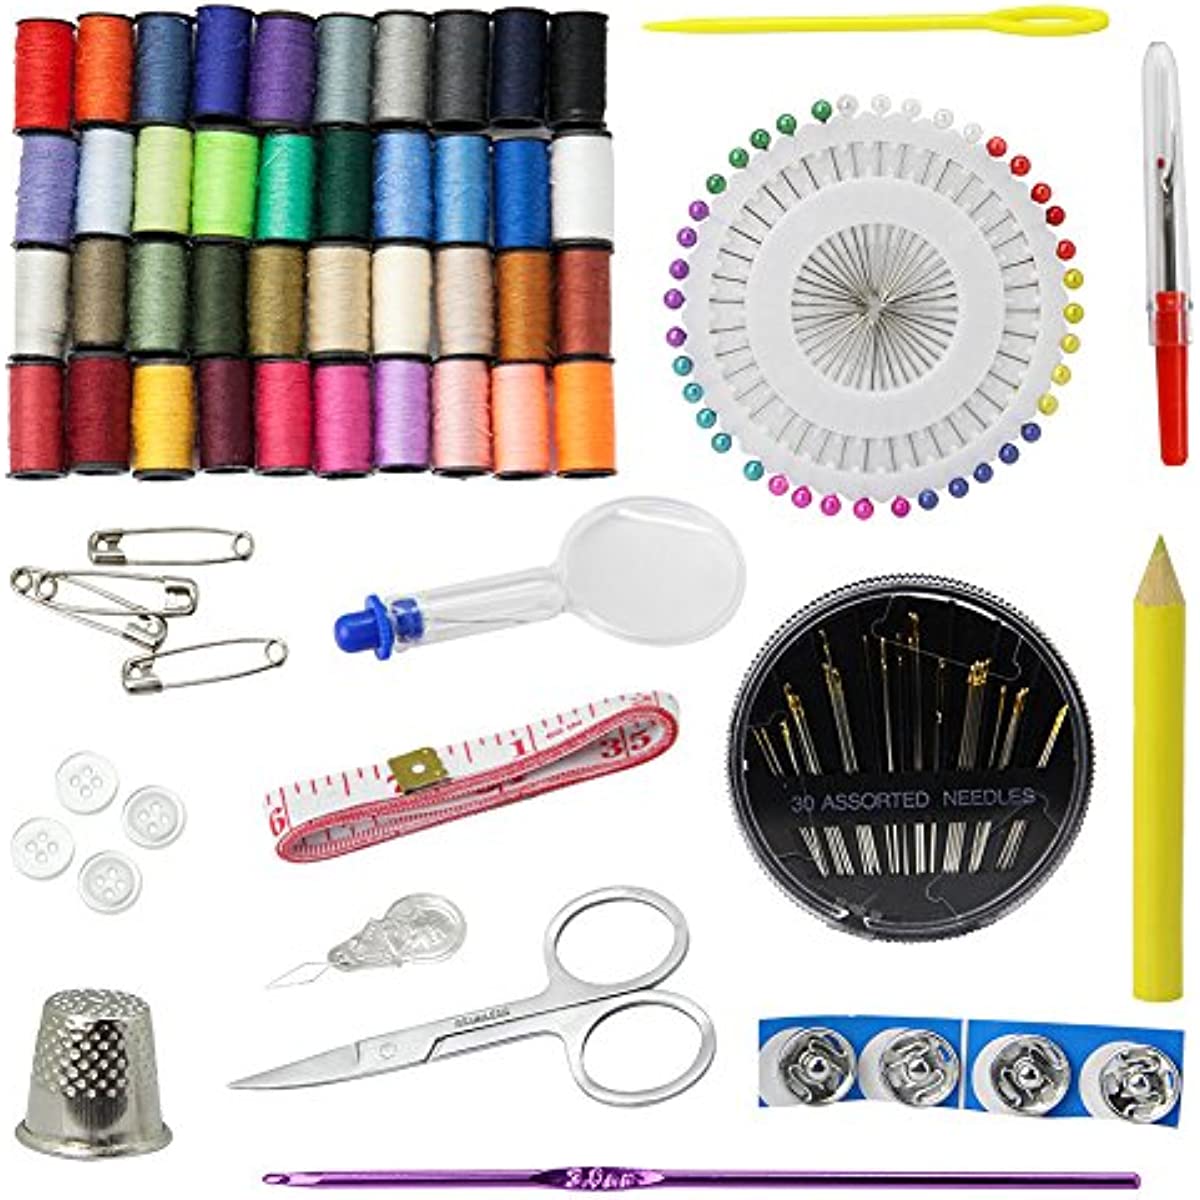 Sewing Kit - DIY Premium Sewing Supplies, Portable & Mini Sew Kits For  Traveler, Adults, Beginner, Emergency - Filled With Mending,Sewing Needles,  Sci